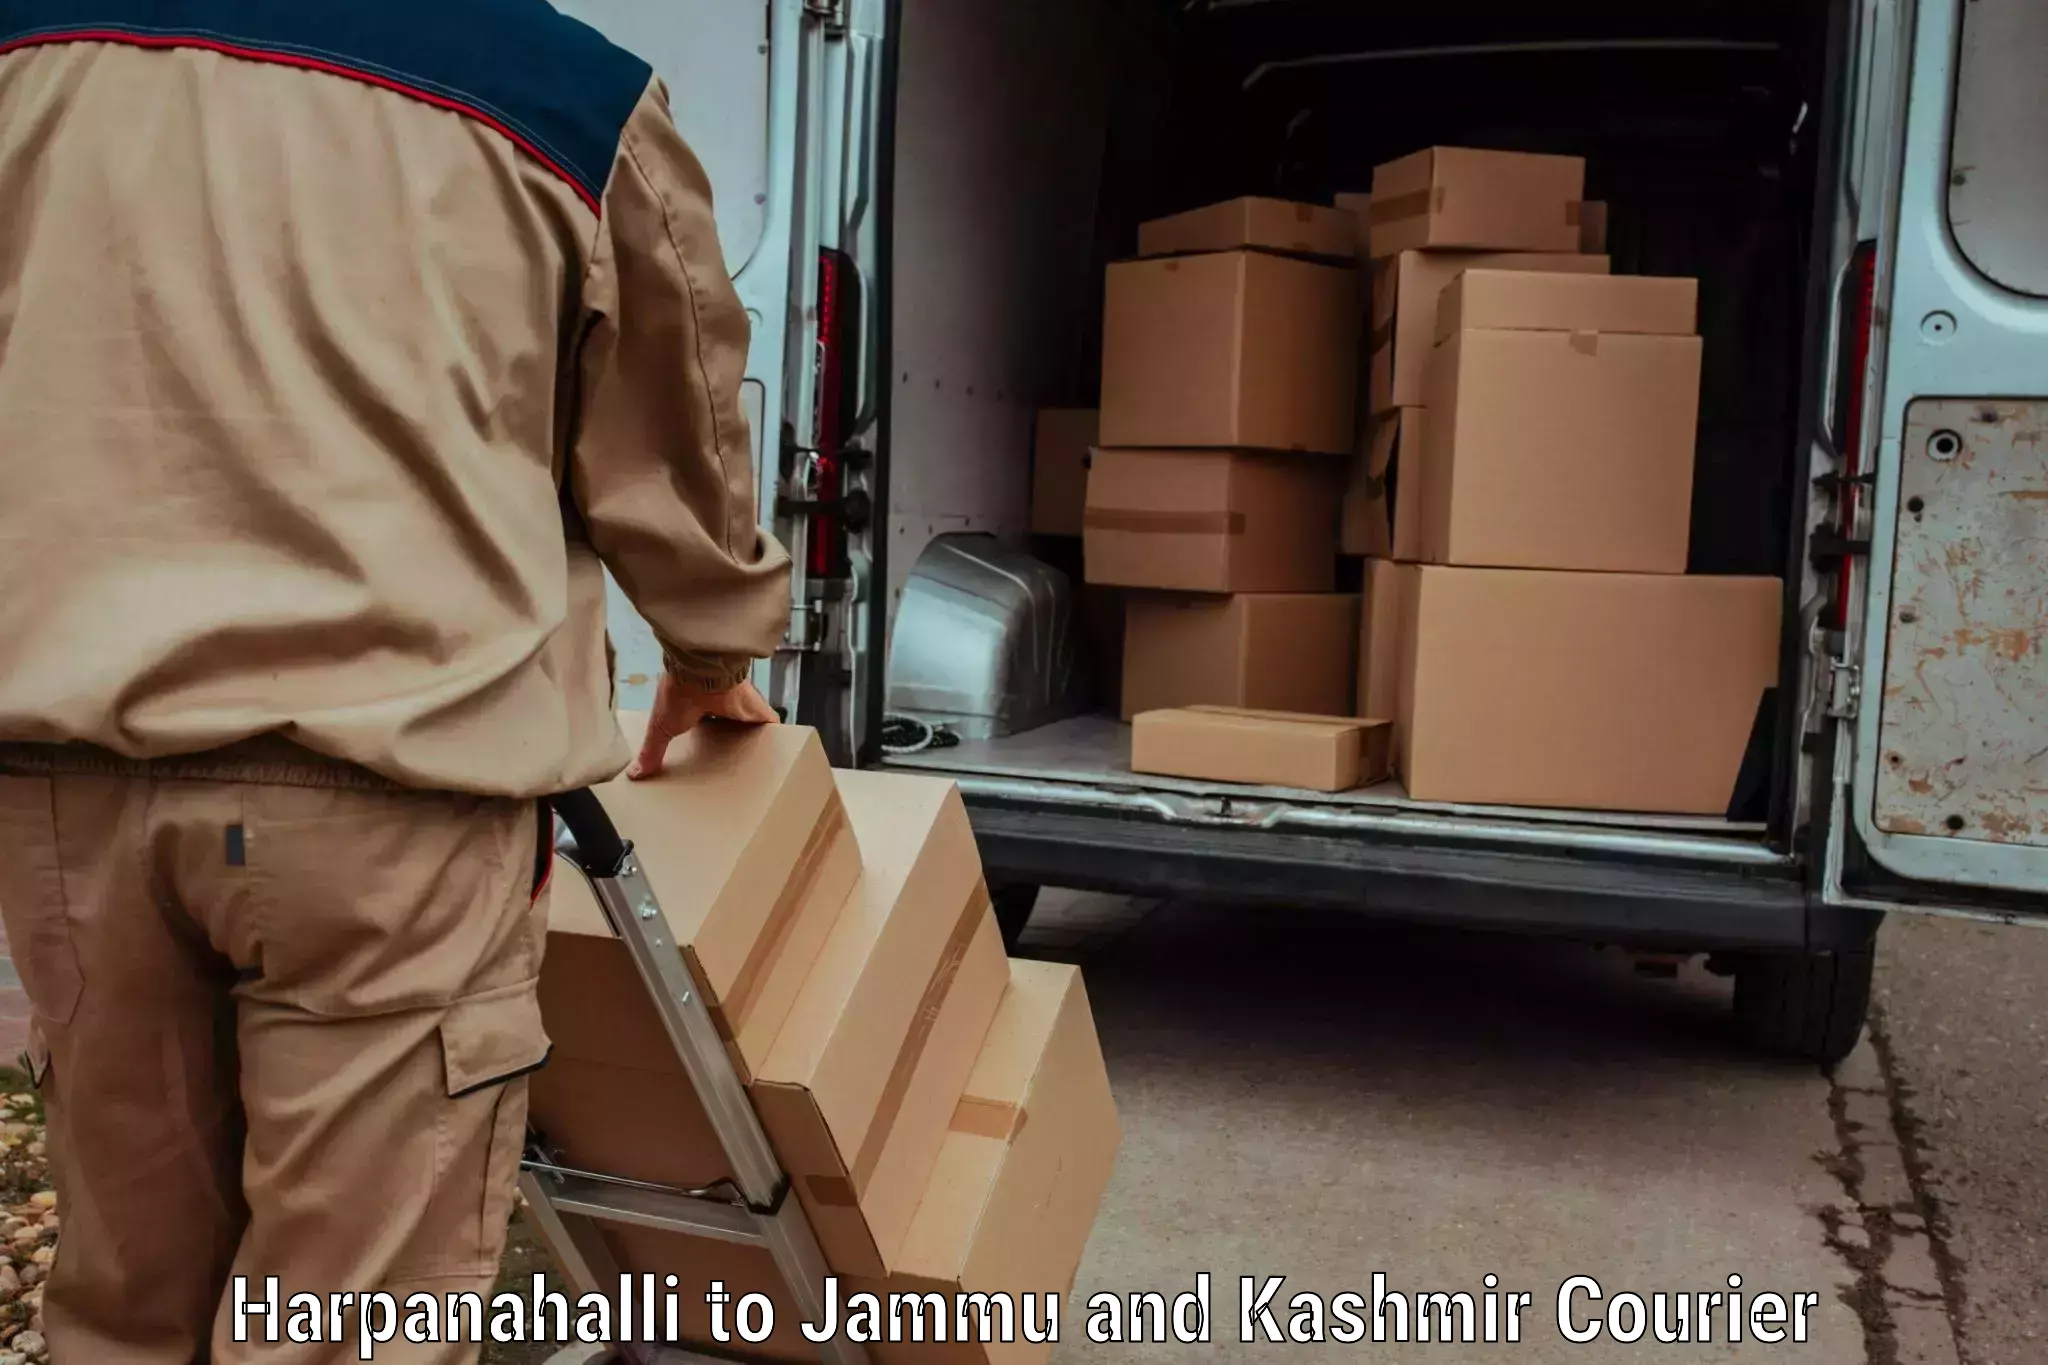 Express delivery solutions Harpanahalli to Baramulla